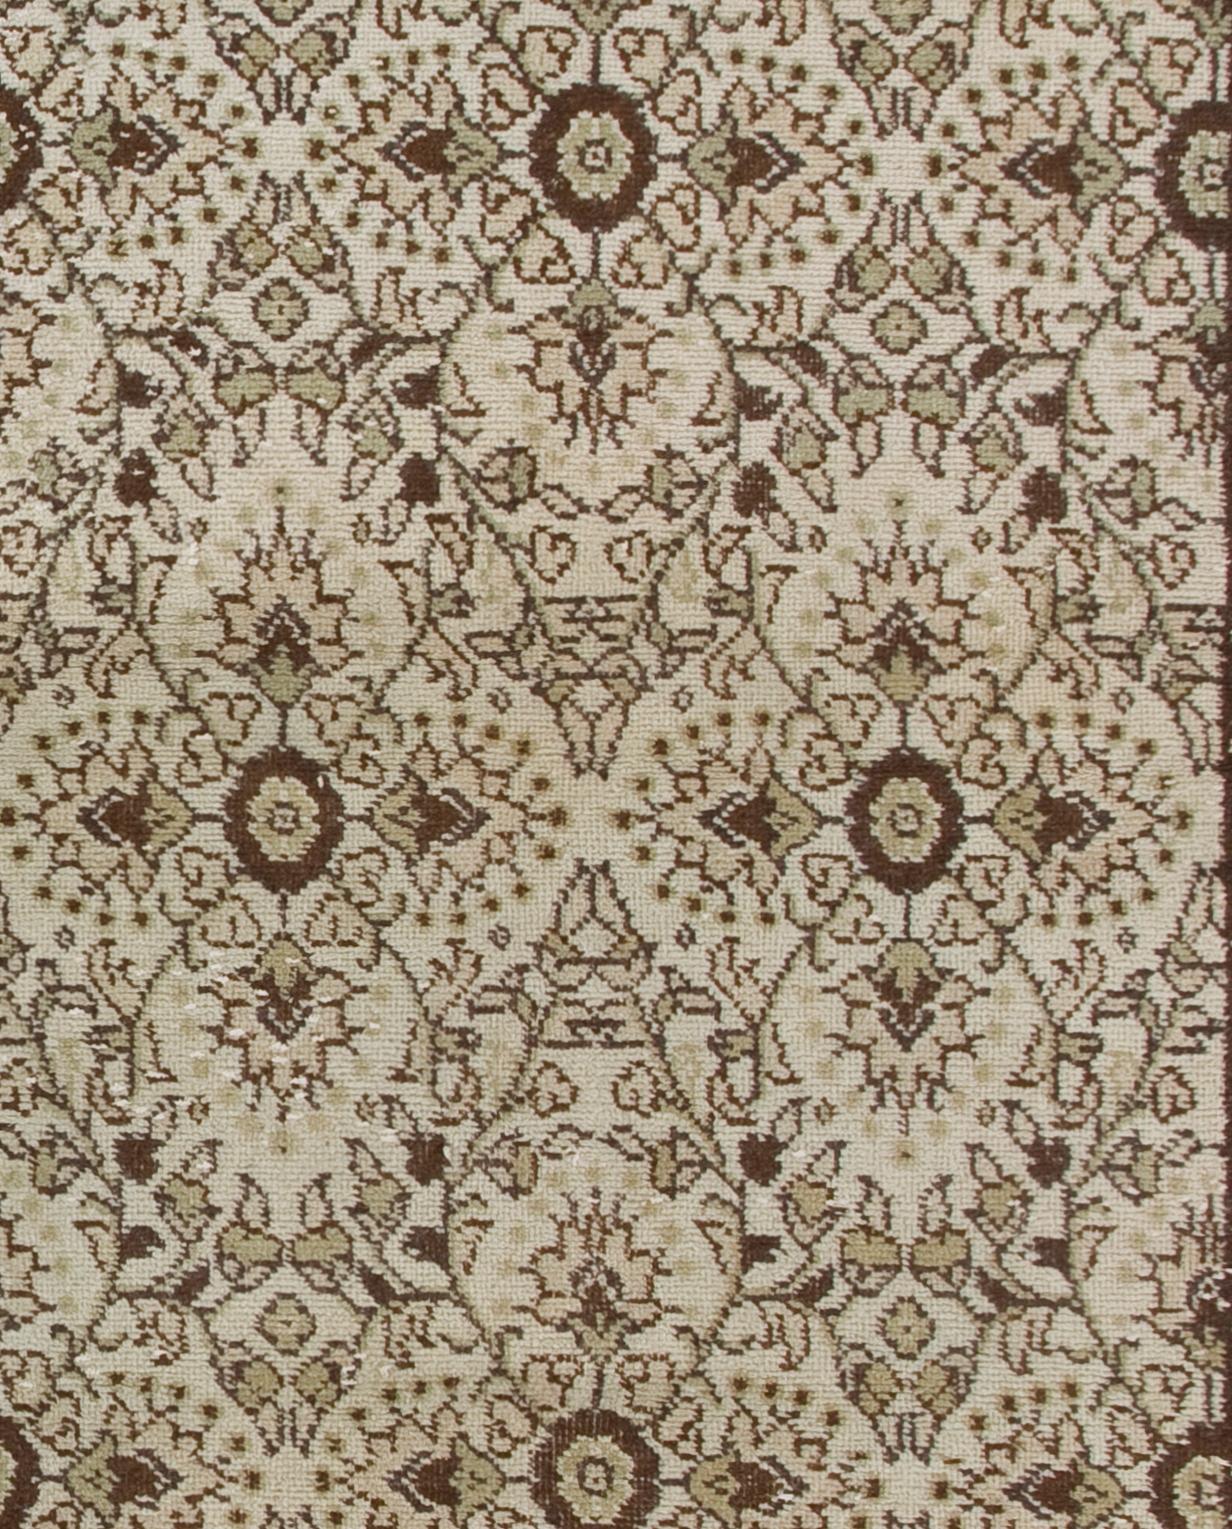 Turkish 4x6.8 Ft Handmade Vintage Floral Rug in Ivory, Brown and Soft Faded Green Color For Sale